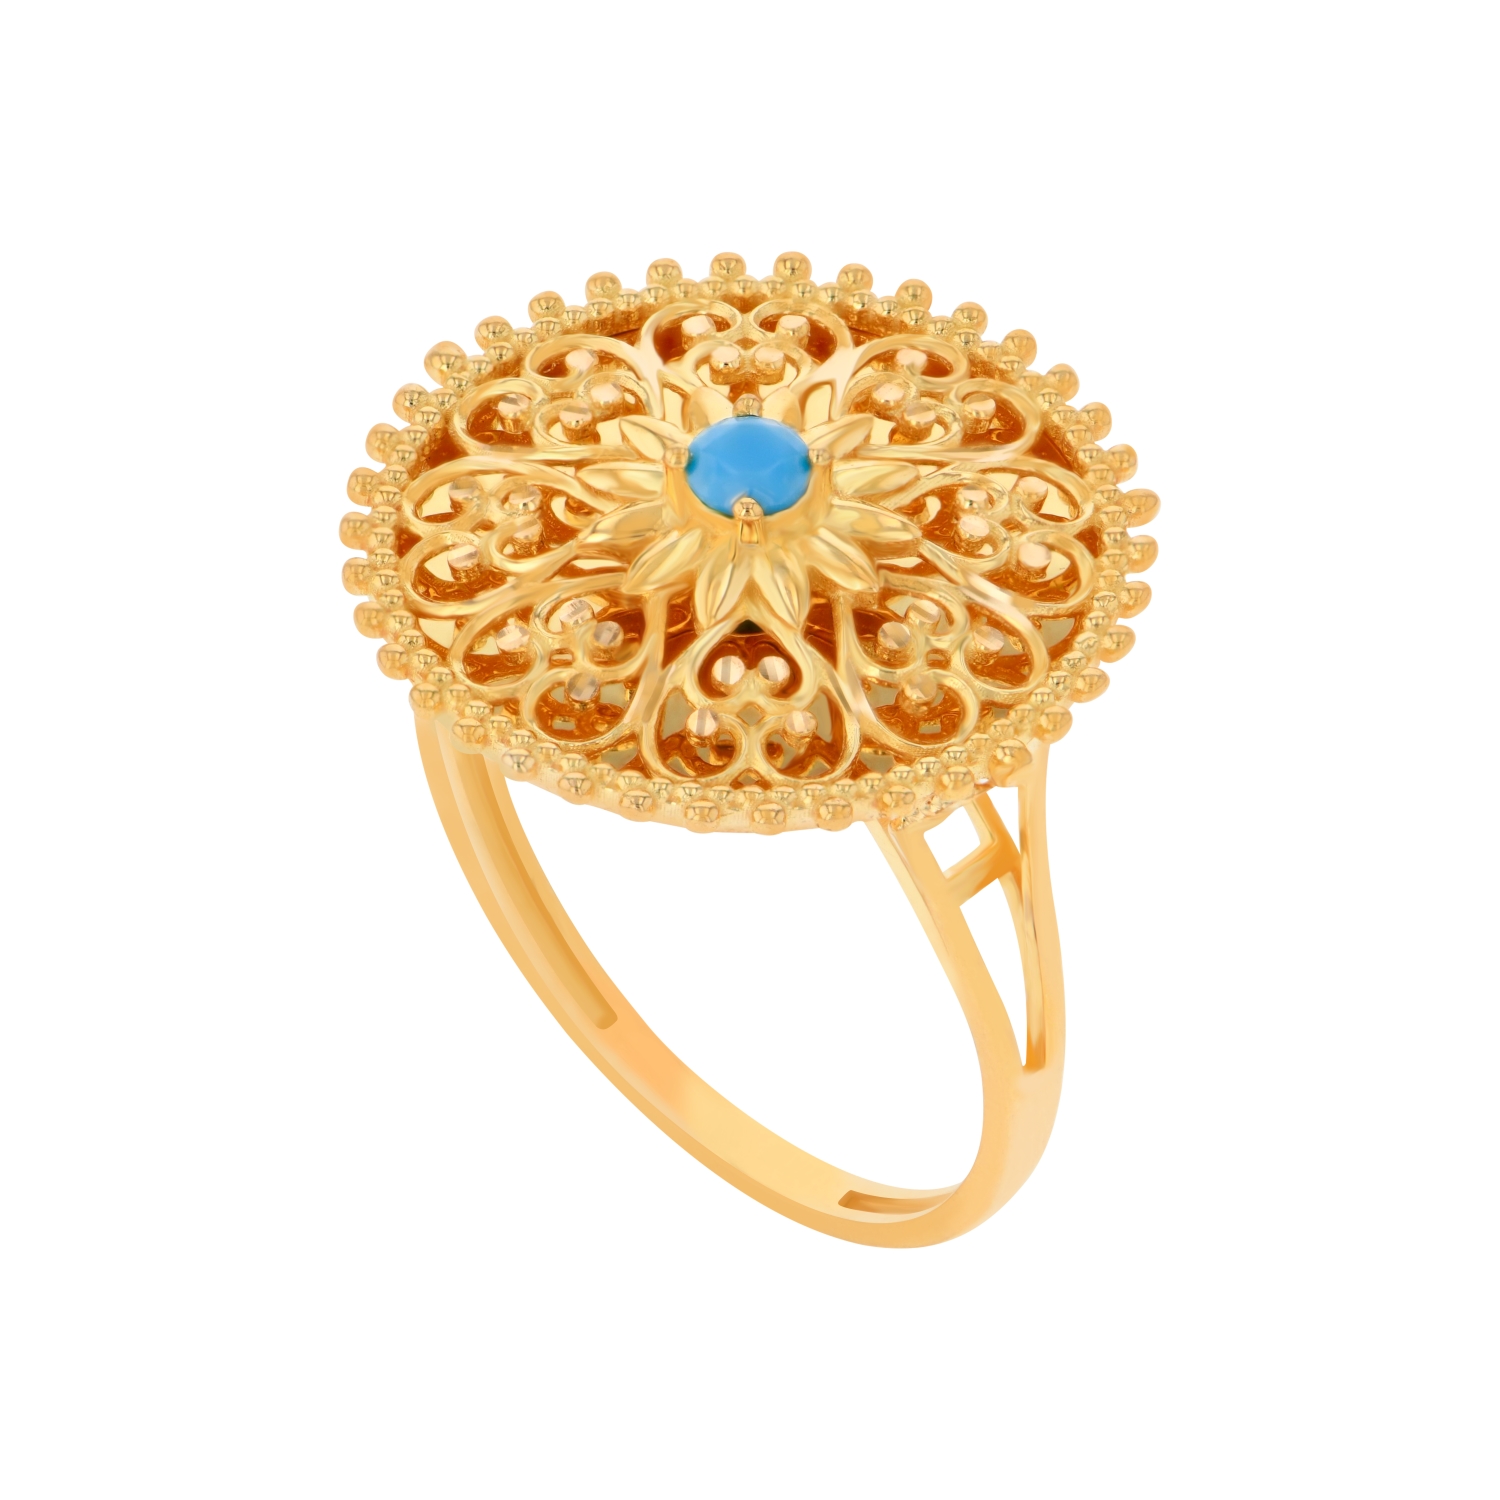 Antique Traditional Gifting Yellow Gold 22kt Rings – Welcome to Rani Alankar